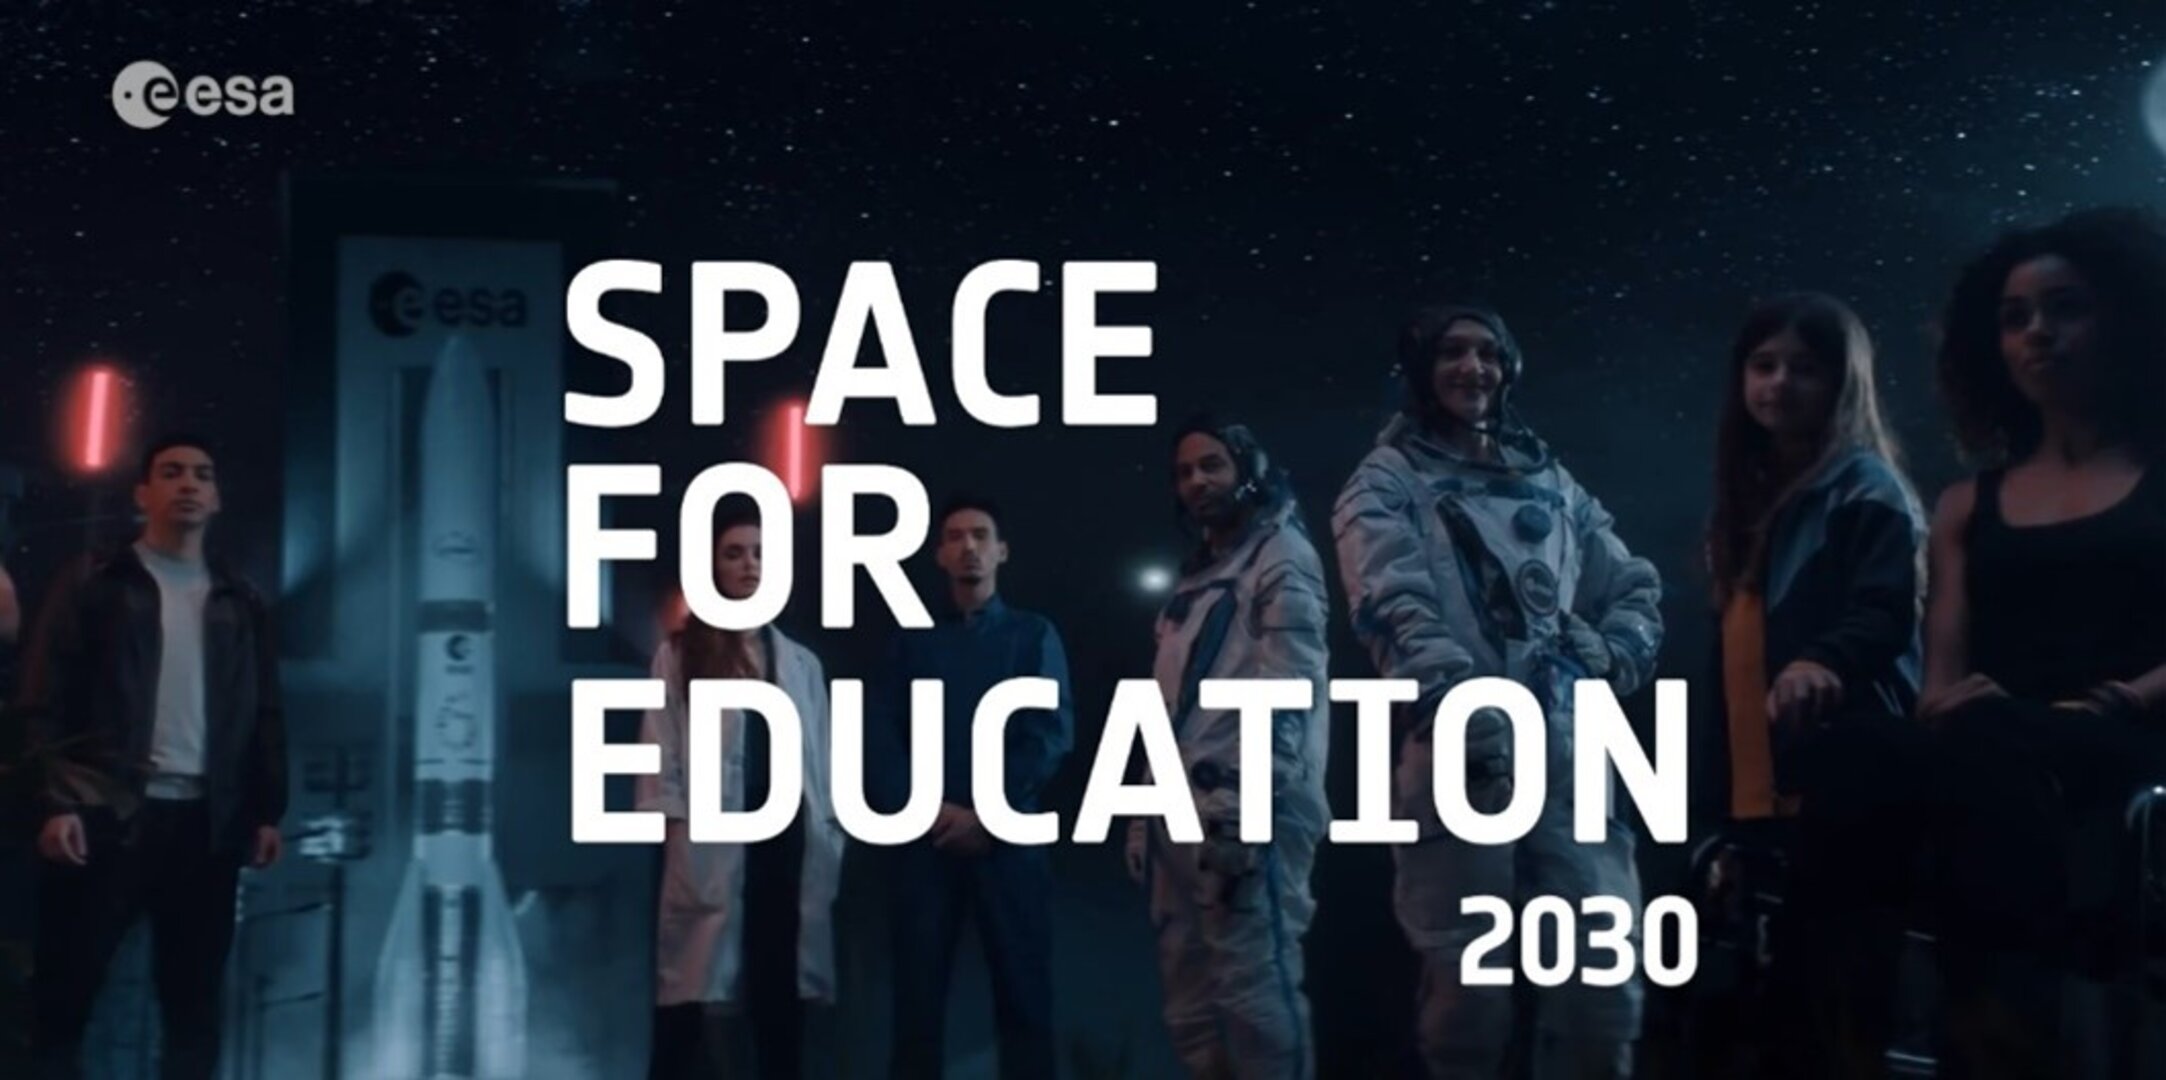 With space at the forefront of education